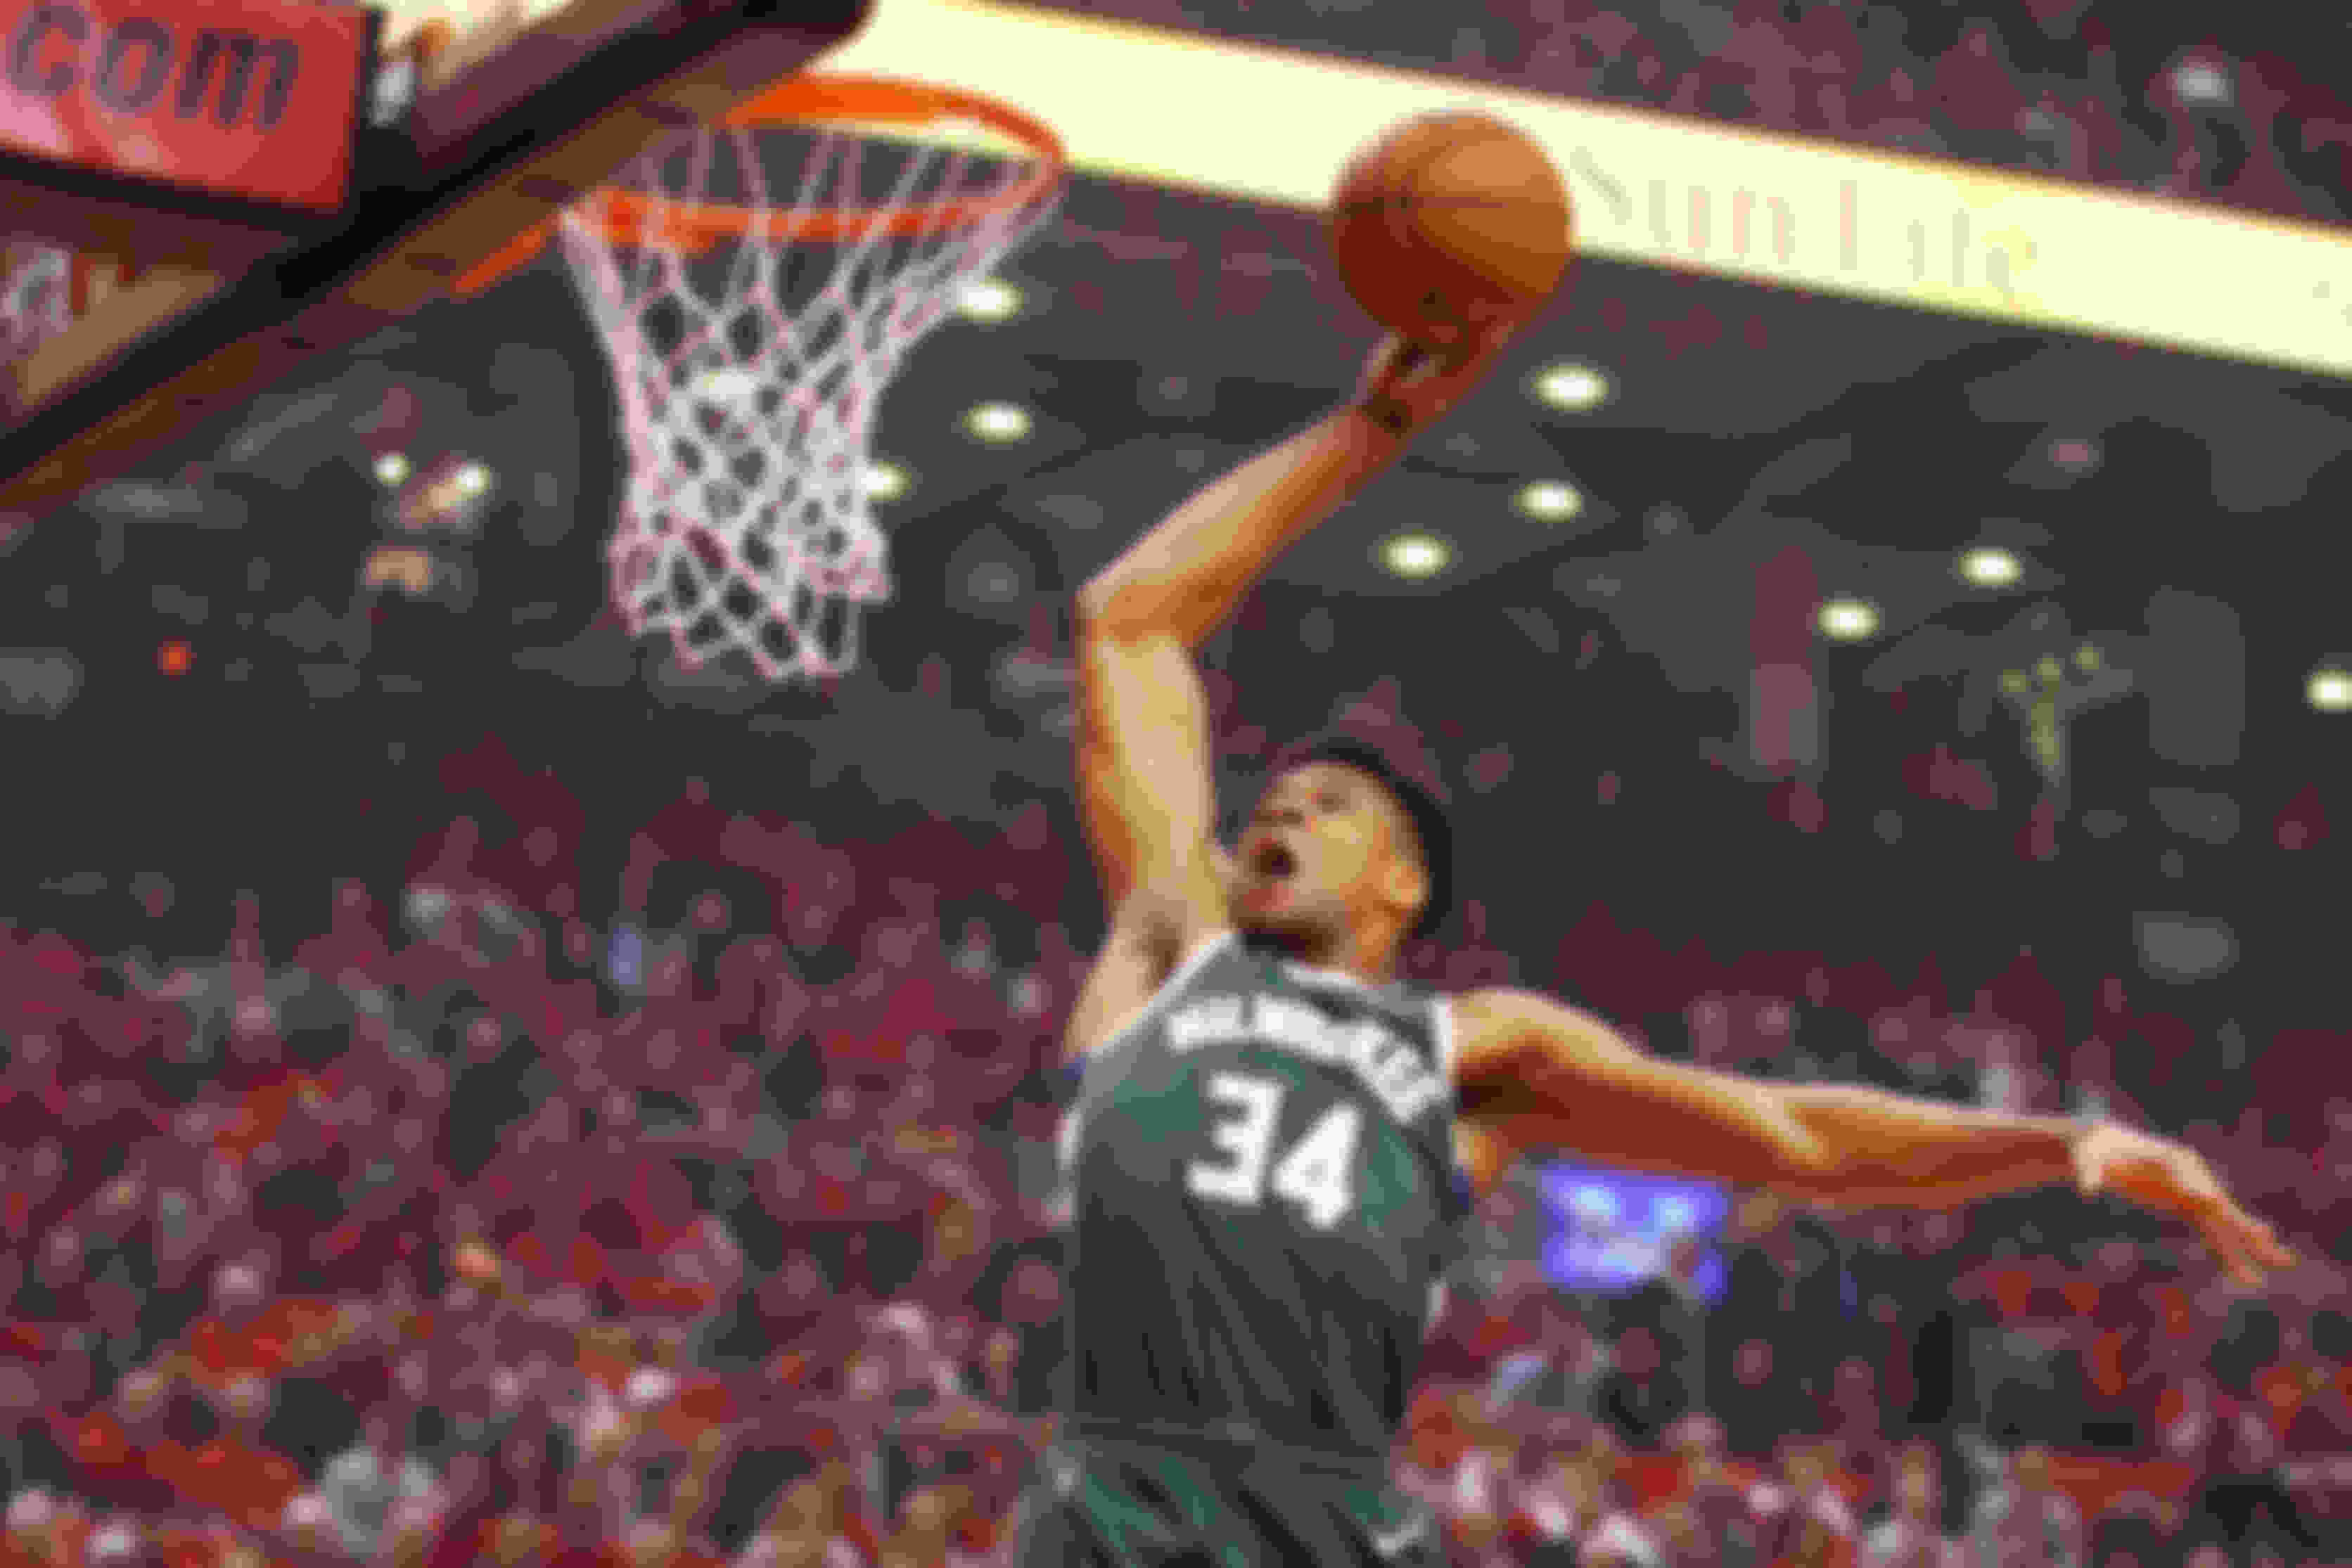 Greek-born Giannis Antetokounmpo signed the most lucrative deal in NBA history in December 2020.